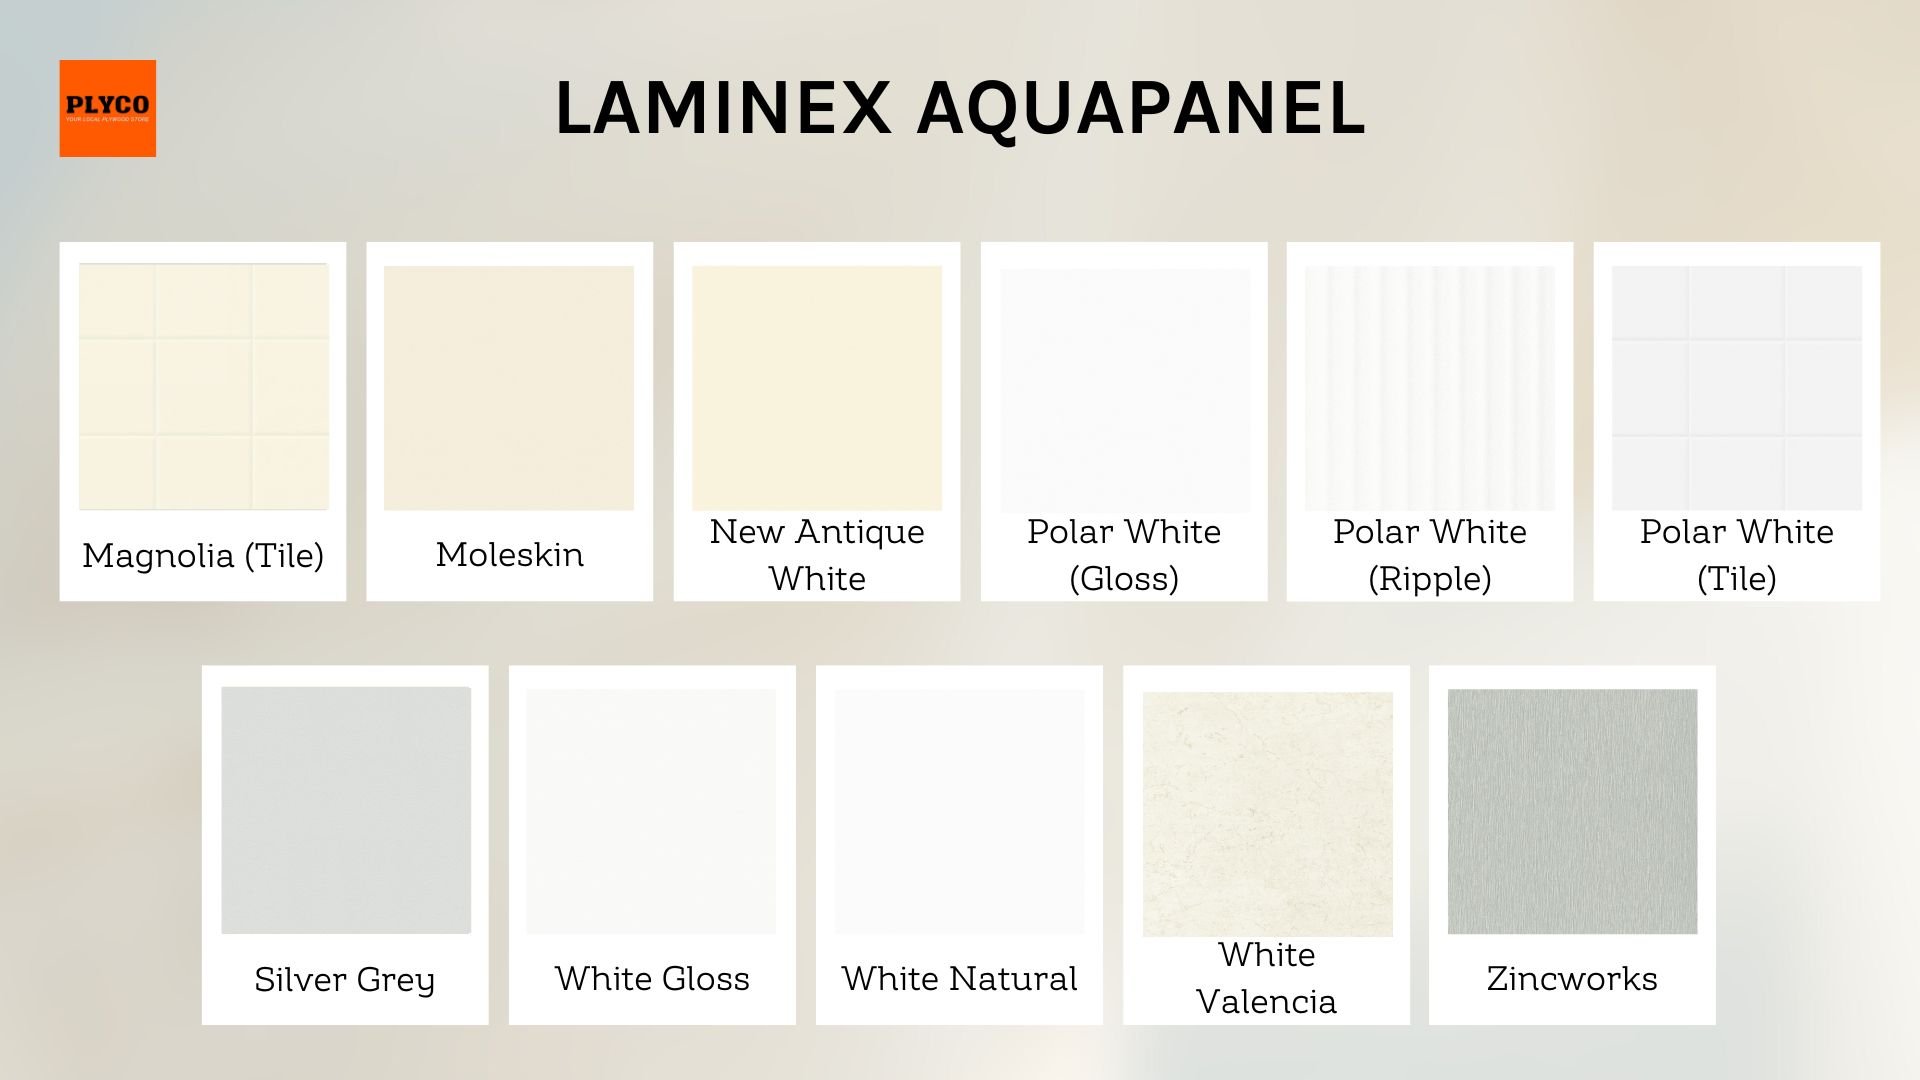 Full range of Laminex Aquapanels available to buy online at Plyco